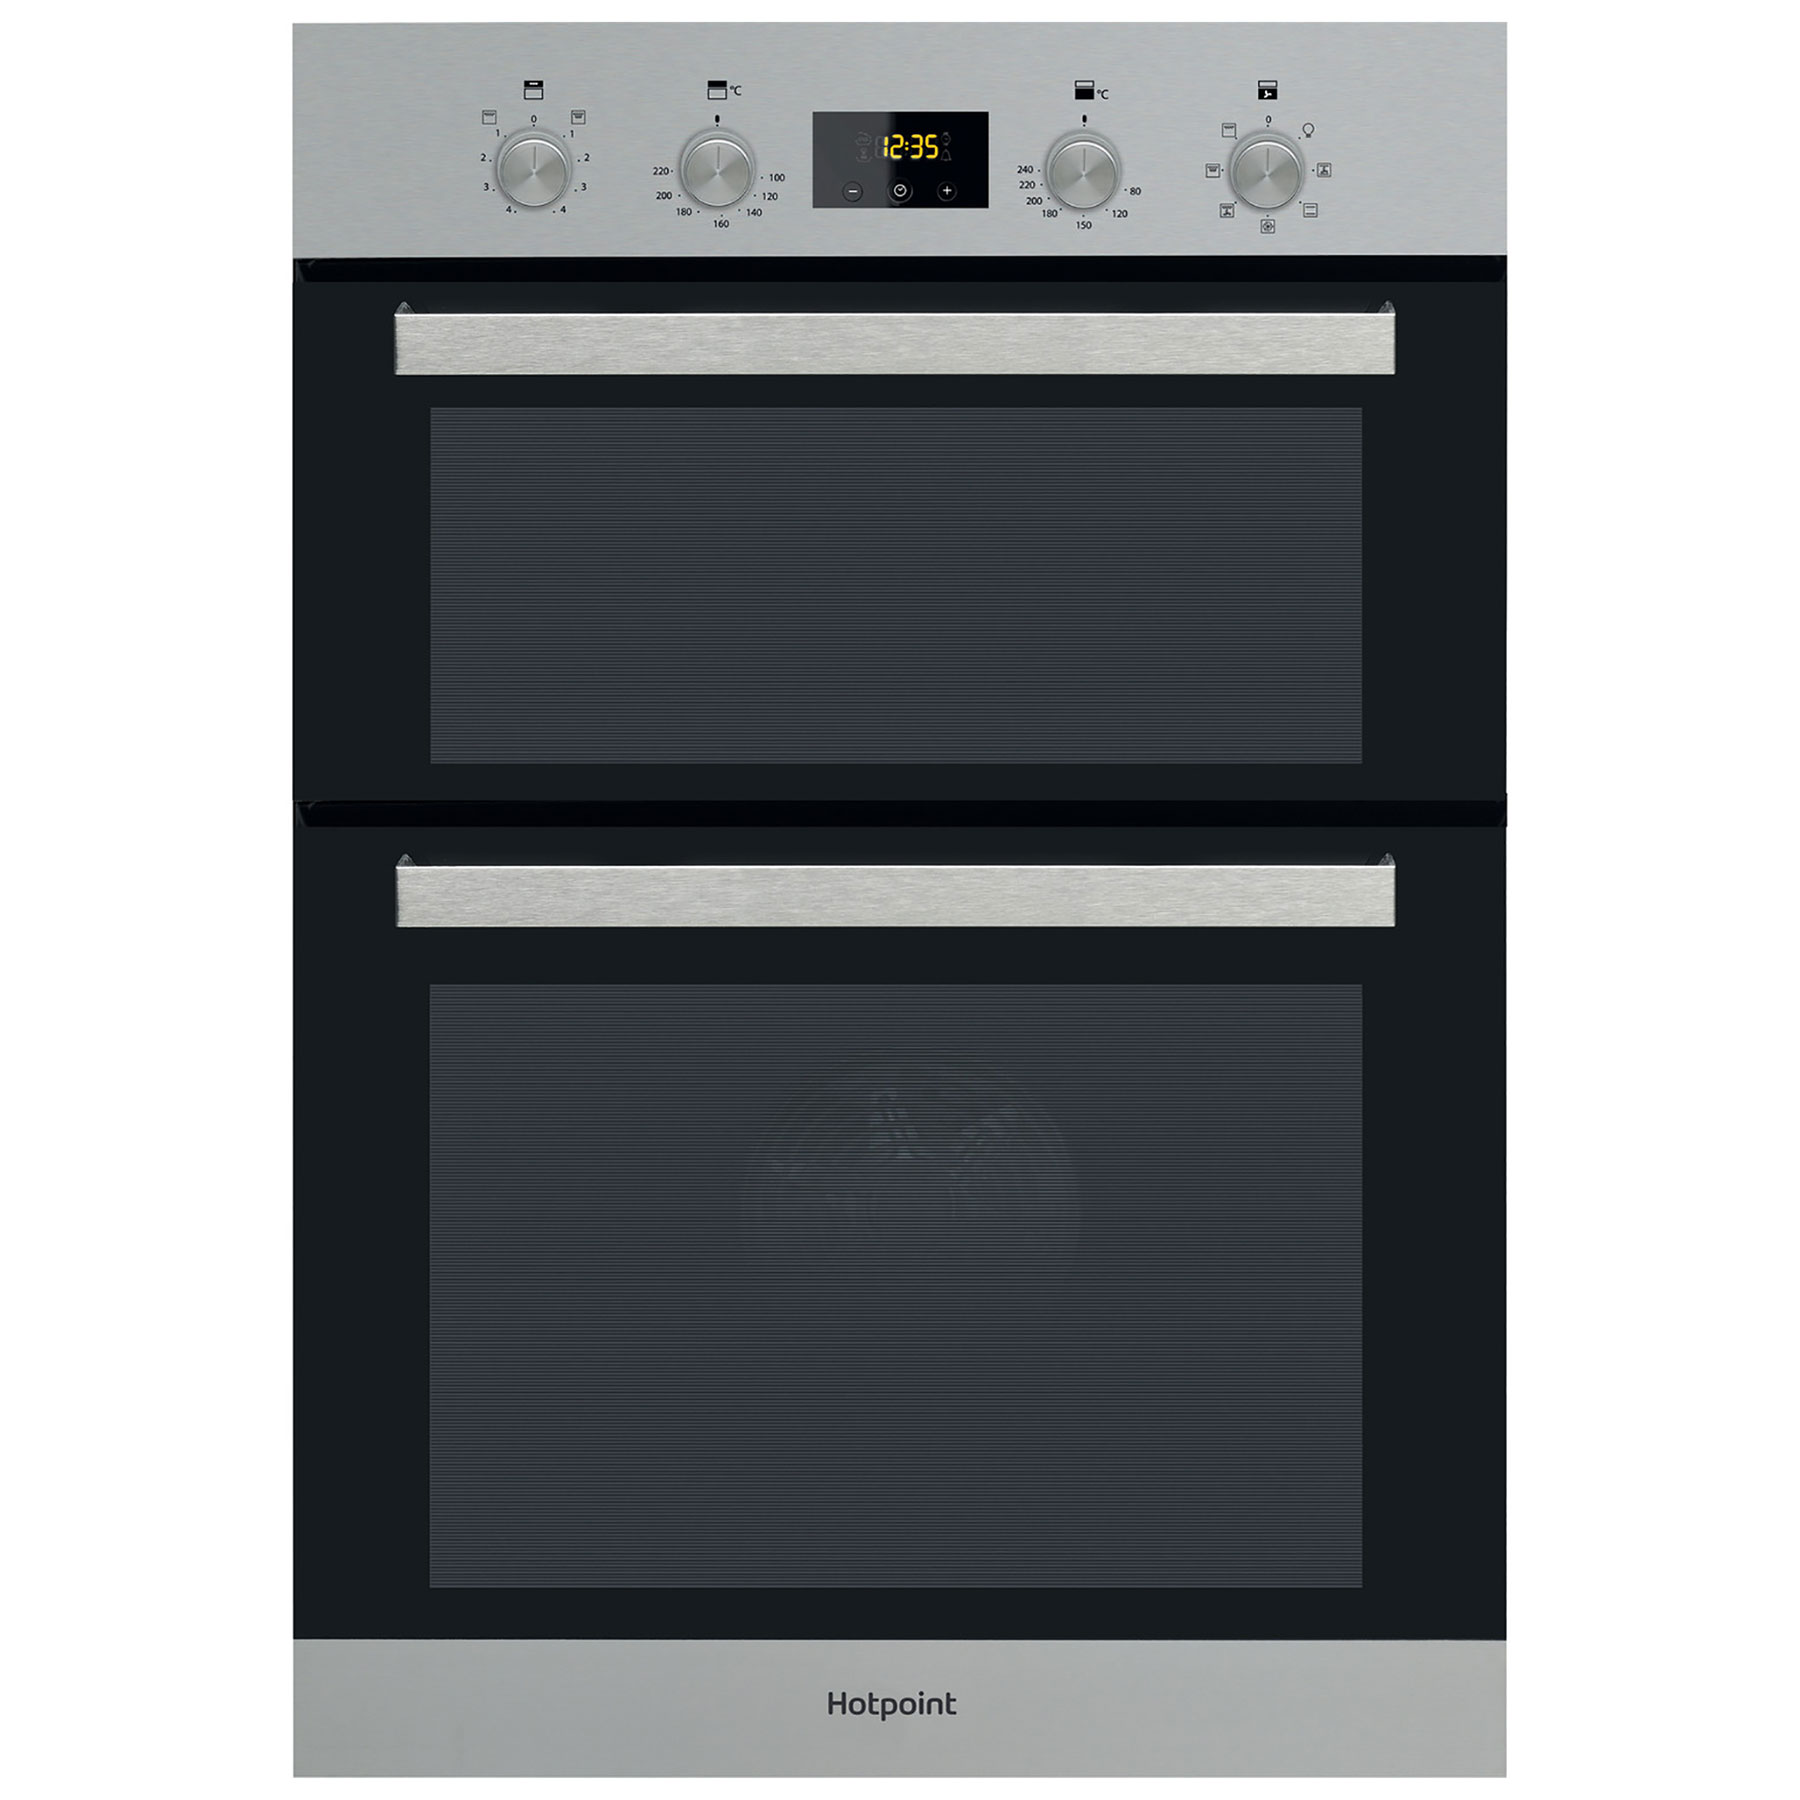 Image of Hotpoint DKD3841IX Built In Electric Double Oven in St Steel 70L A A R